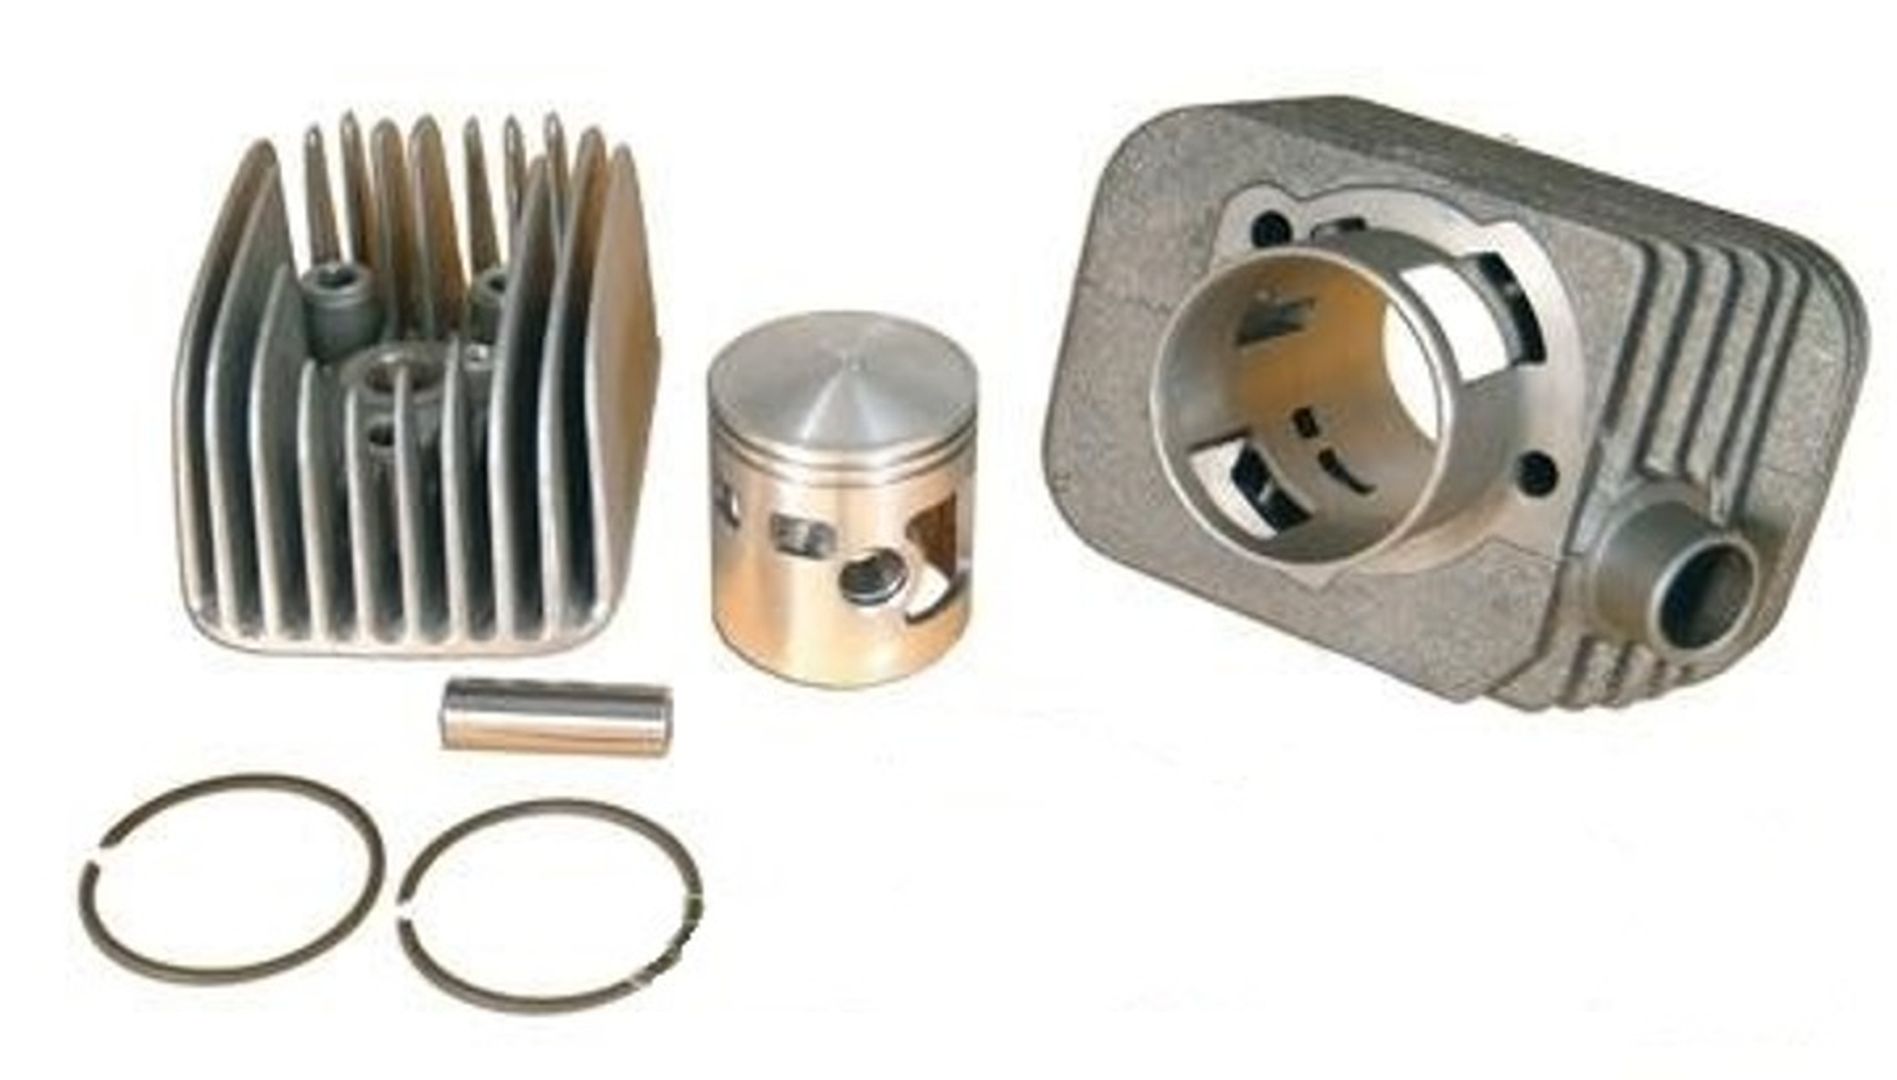 Piaggio cylindre avec piston complet 46 mm Axe 10 mm avec tête pour Ciao SI